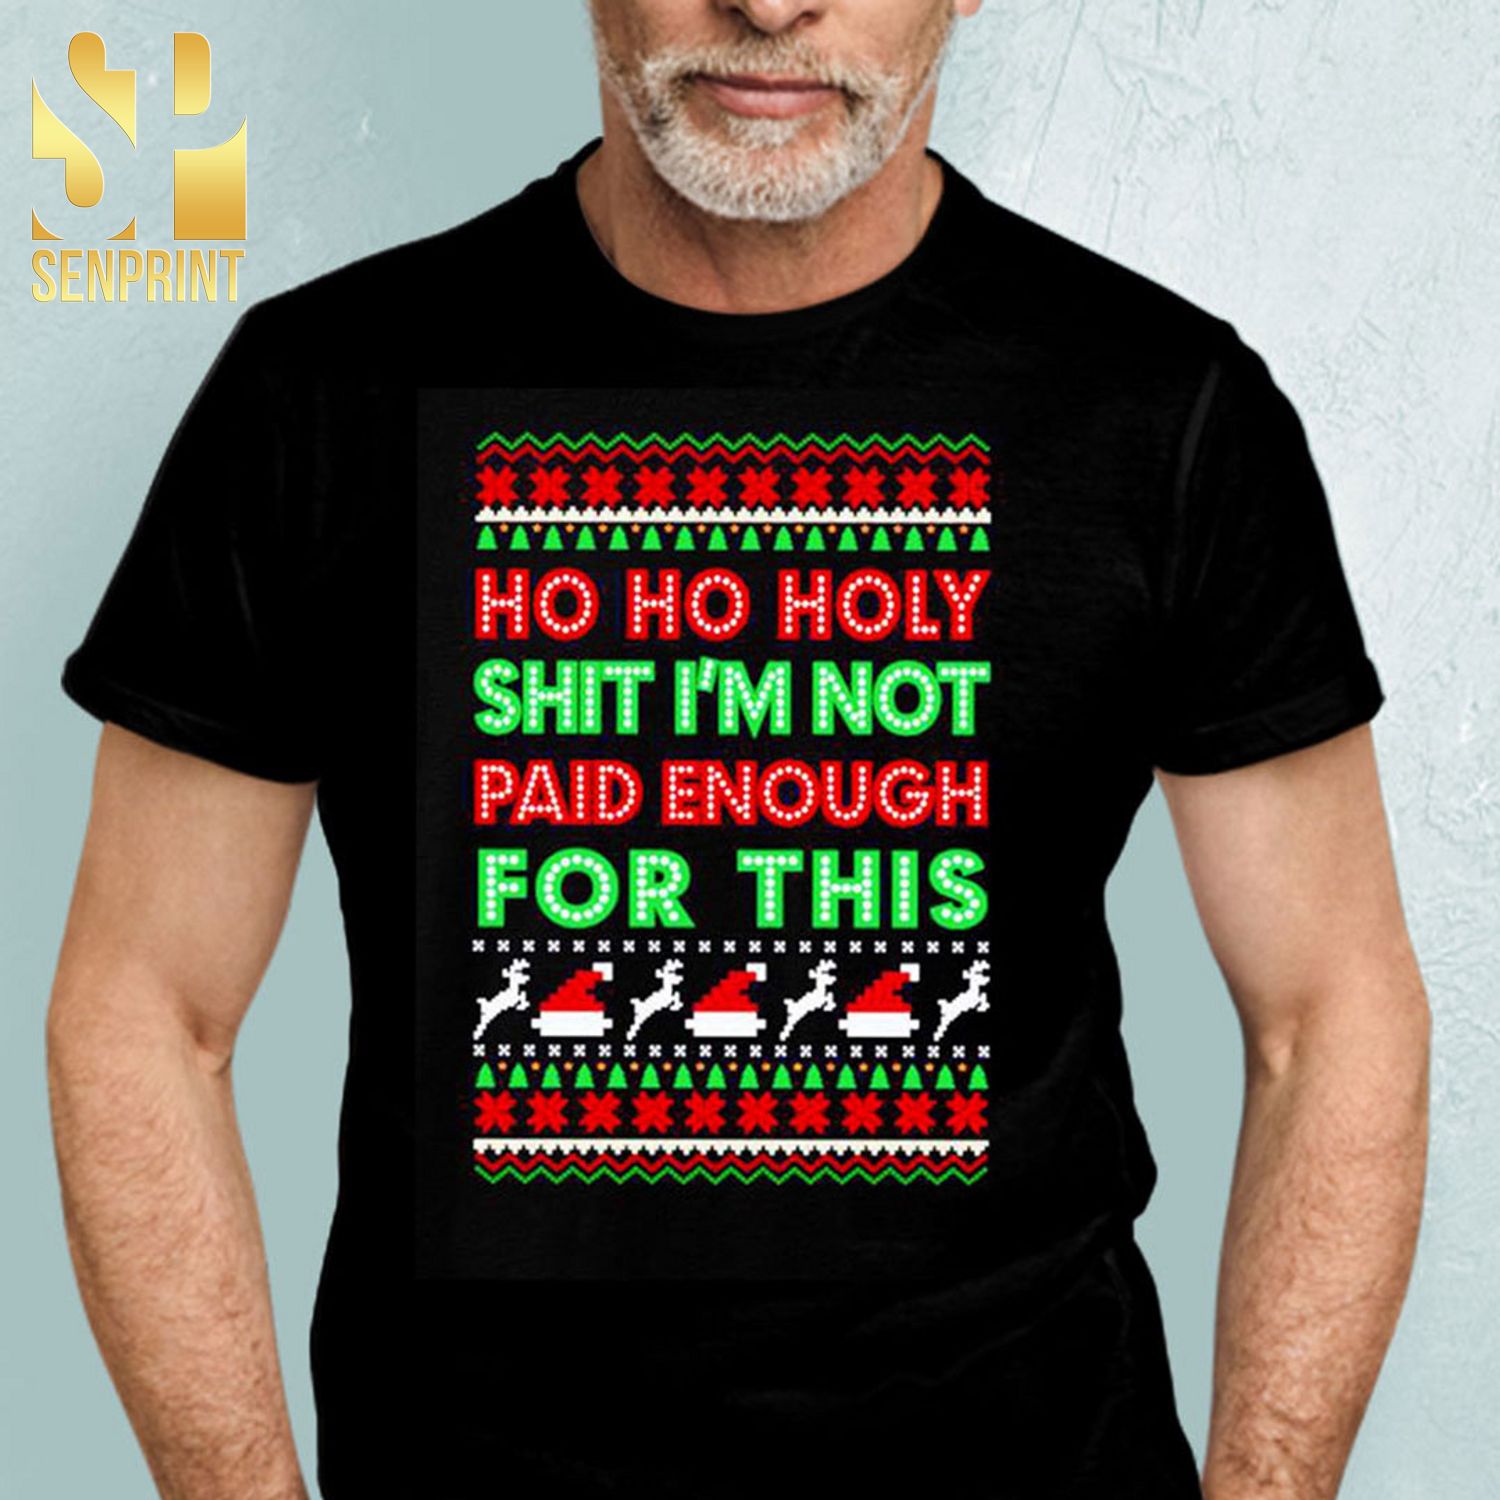 Ho Ho Holy Shit I’m Not Paid For This Ugly Christmas Gifts Shirt